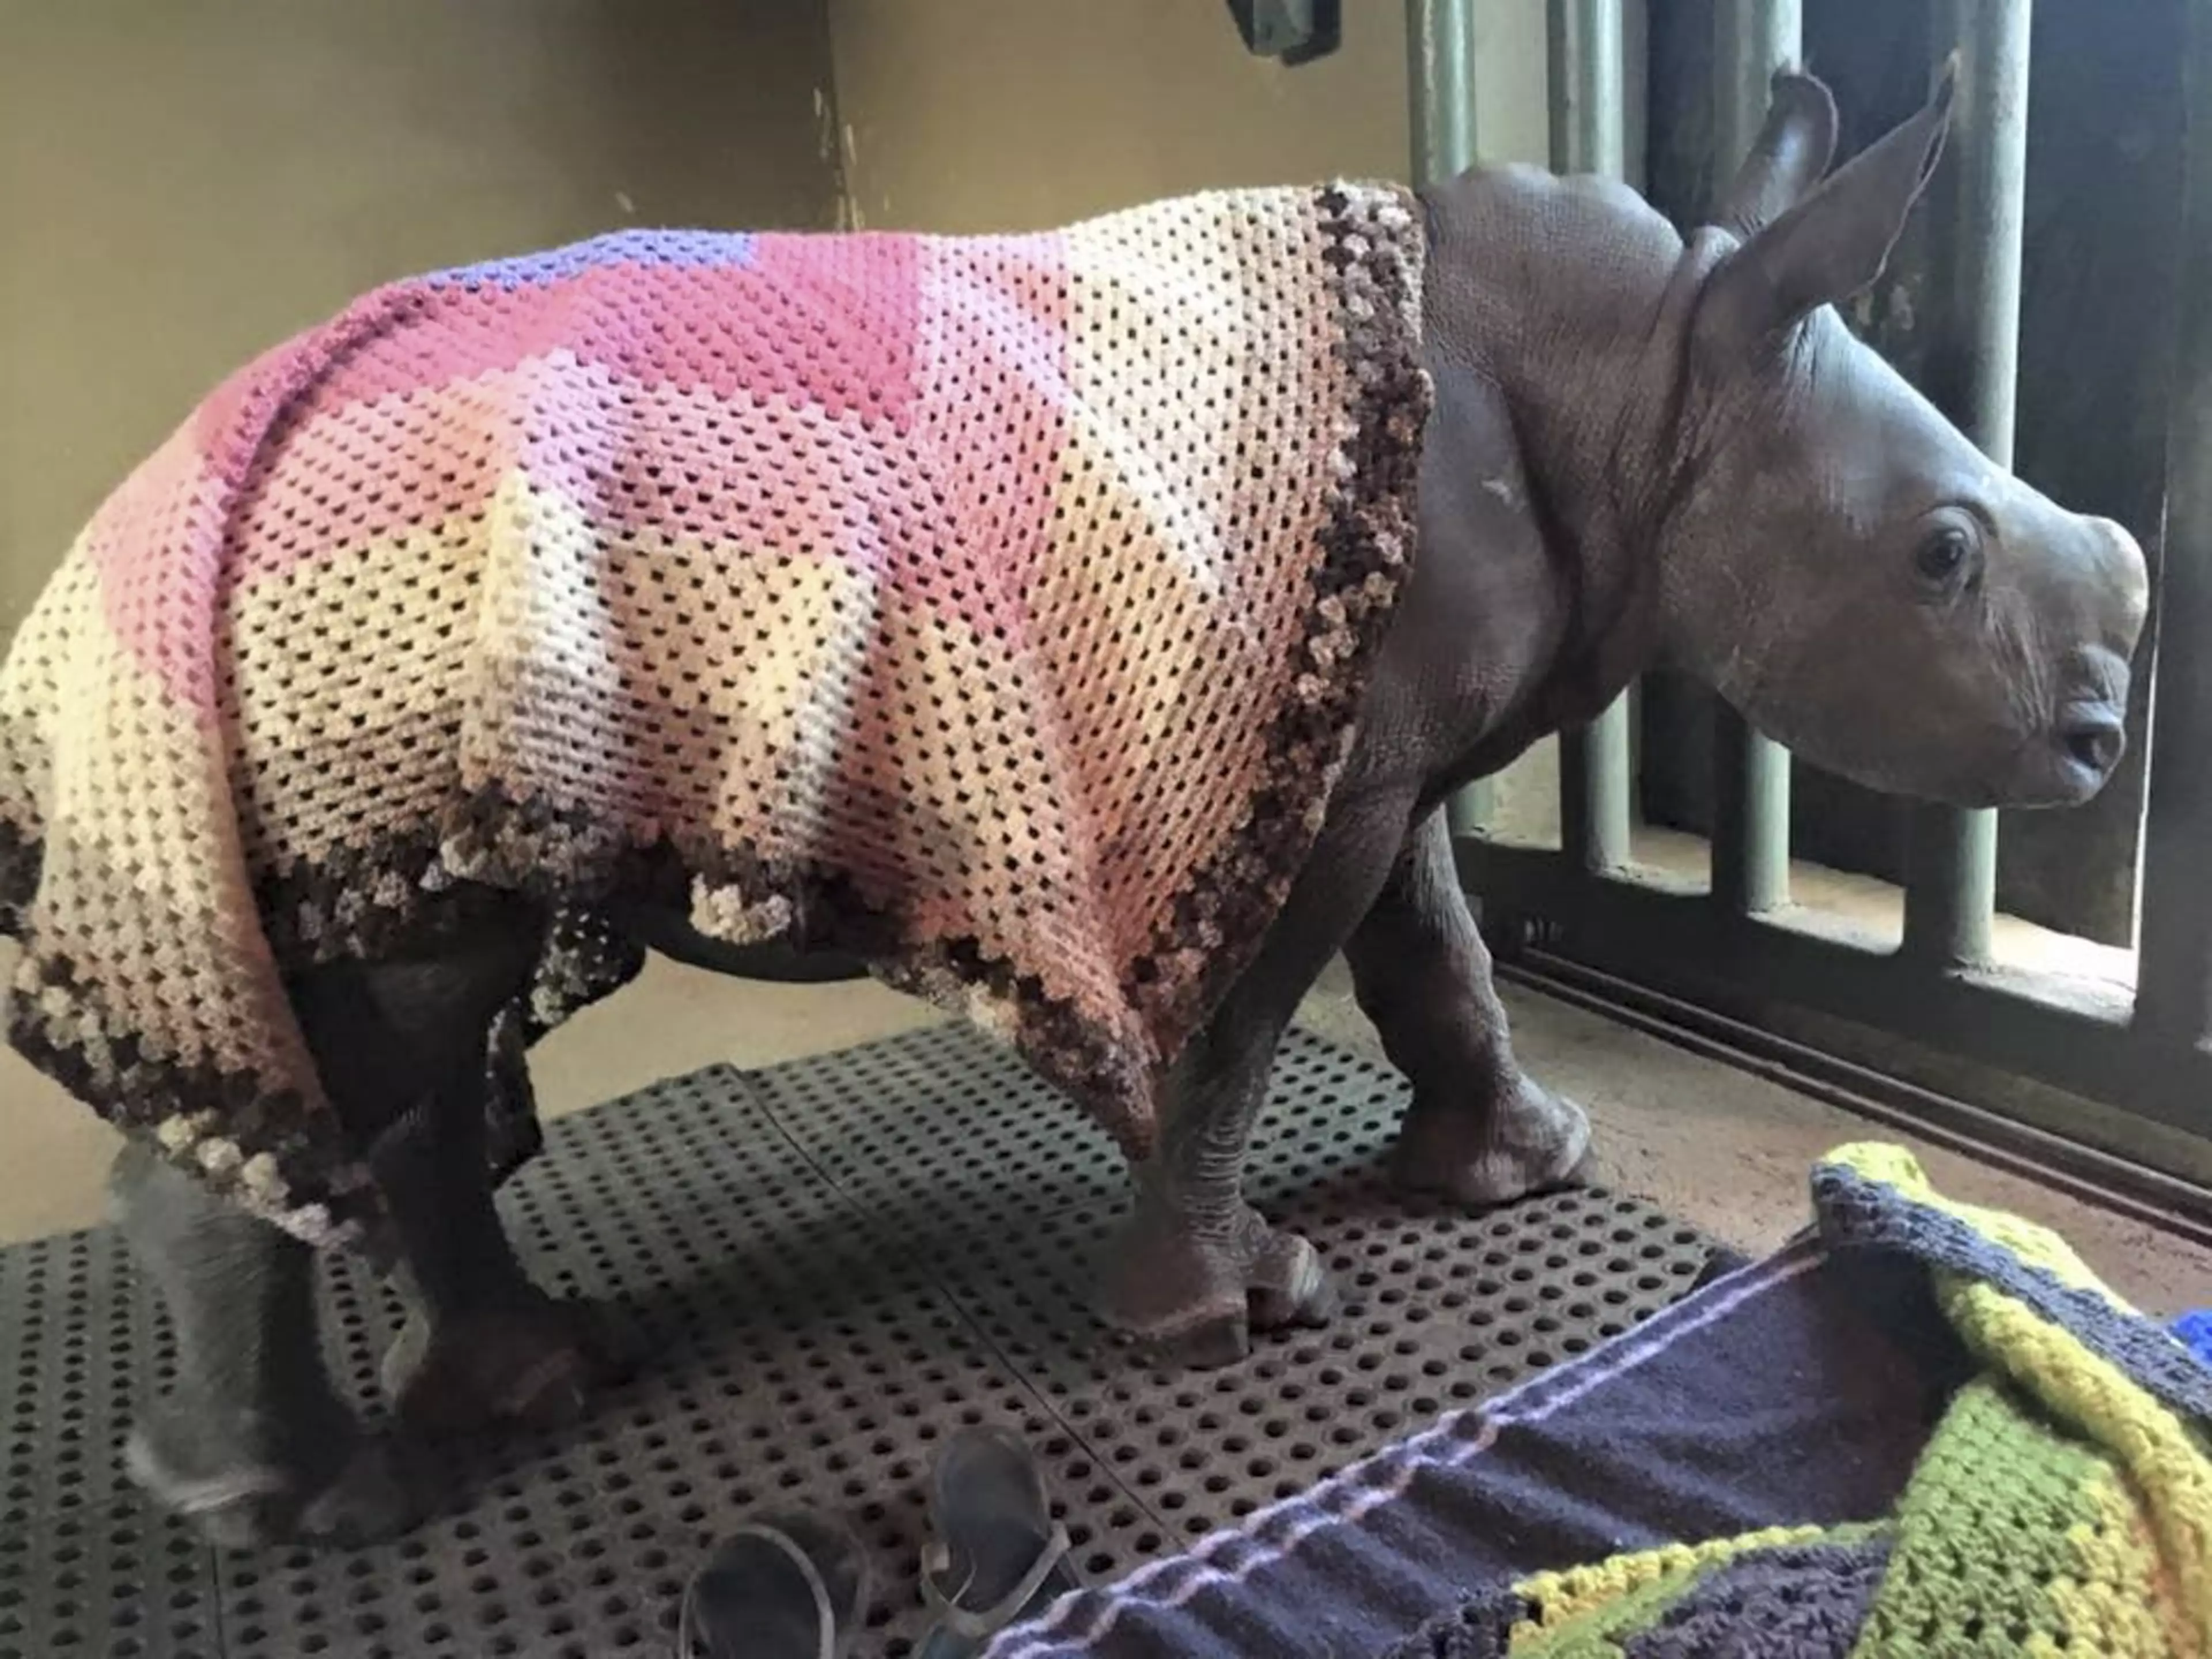 The colourful blankets are keeping orphaned rhinos warm (